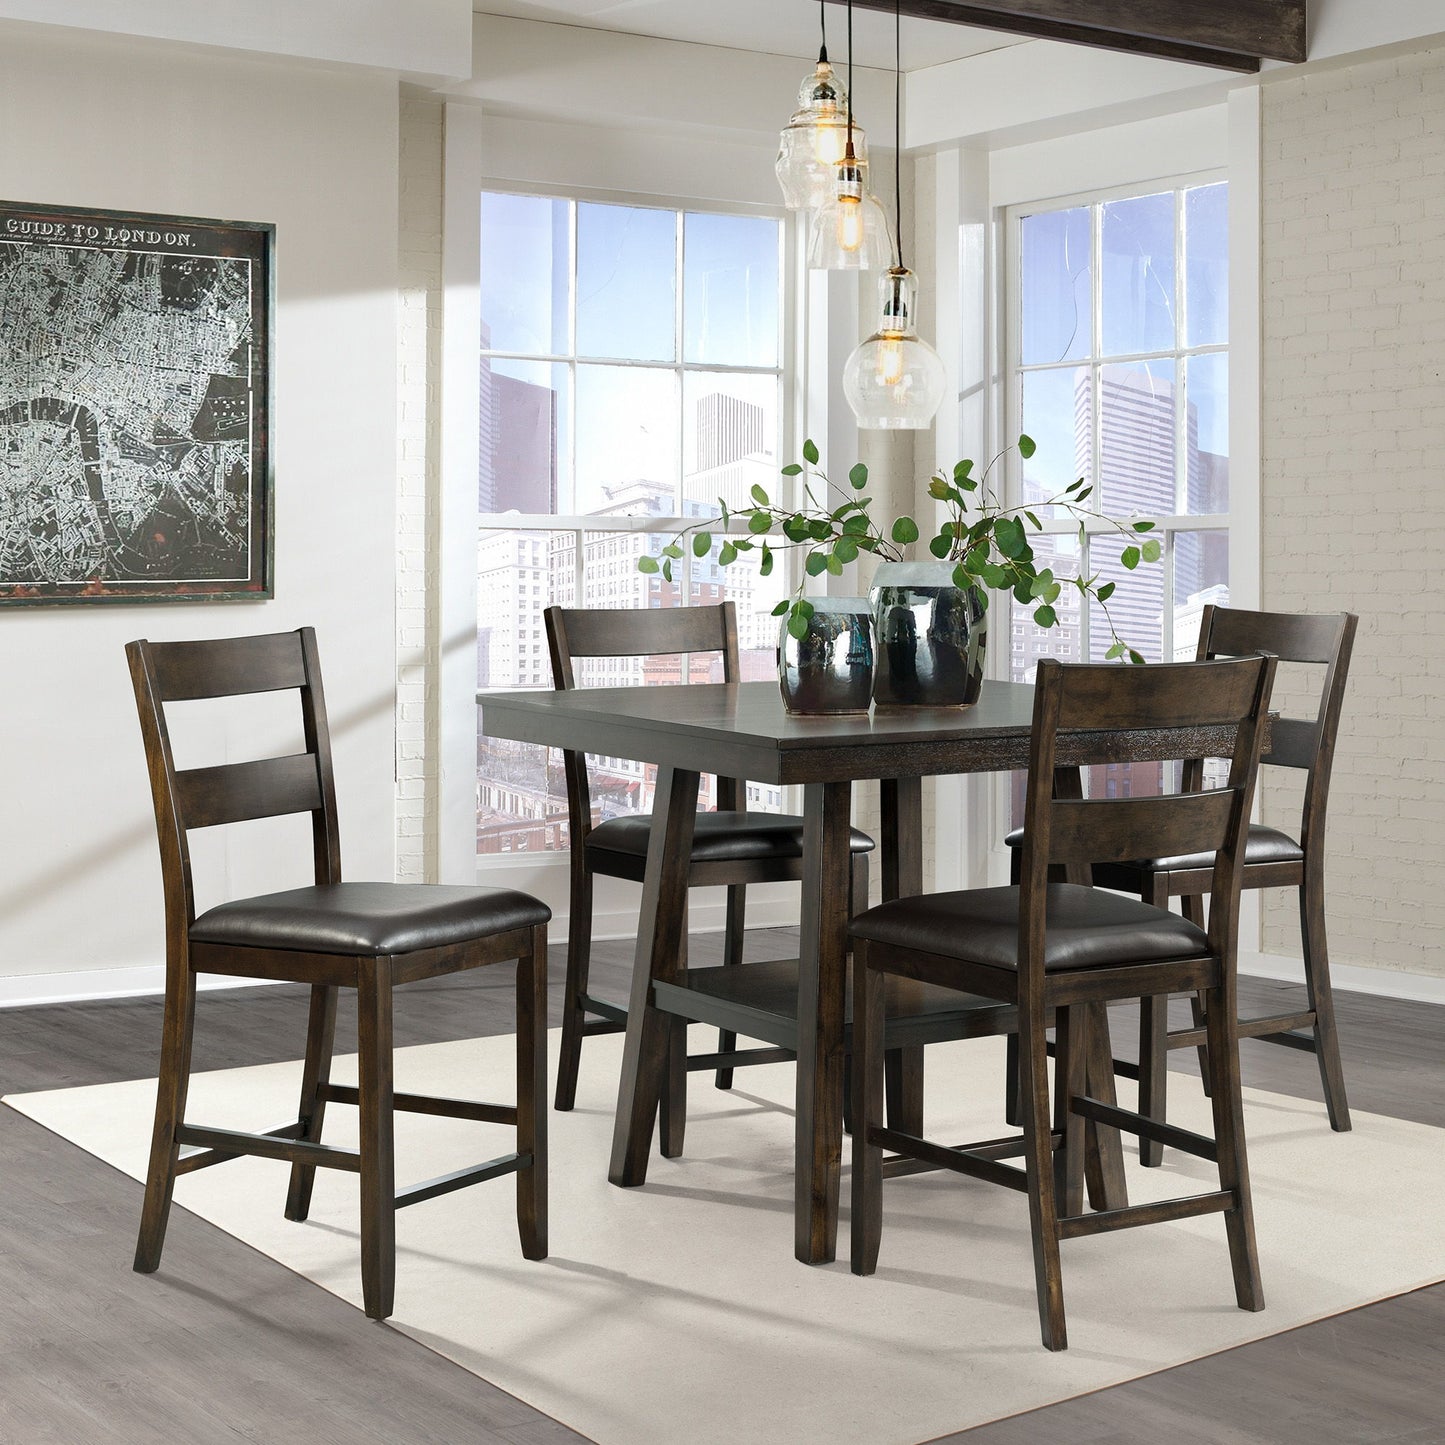 Laredo - 5 Piece Counter Height Dining Set-Table & Four Chairs - Espresso